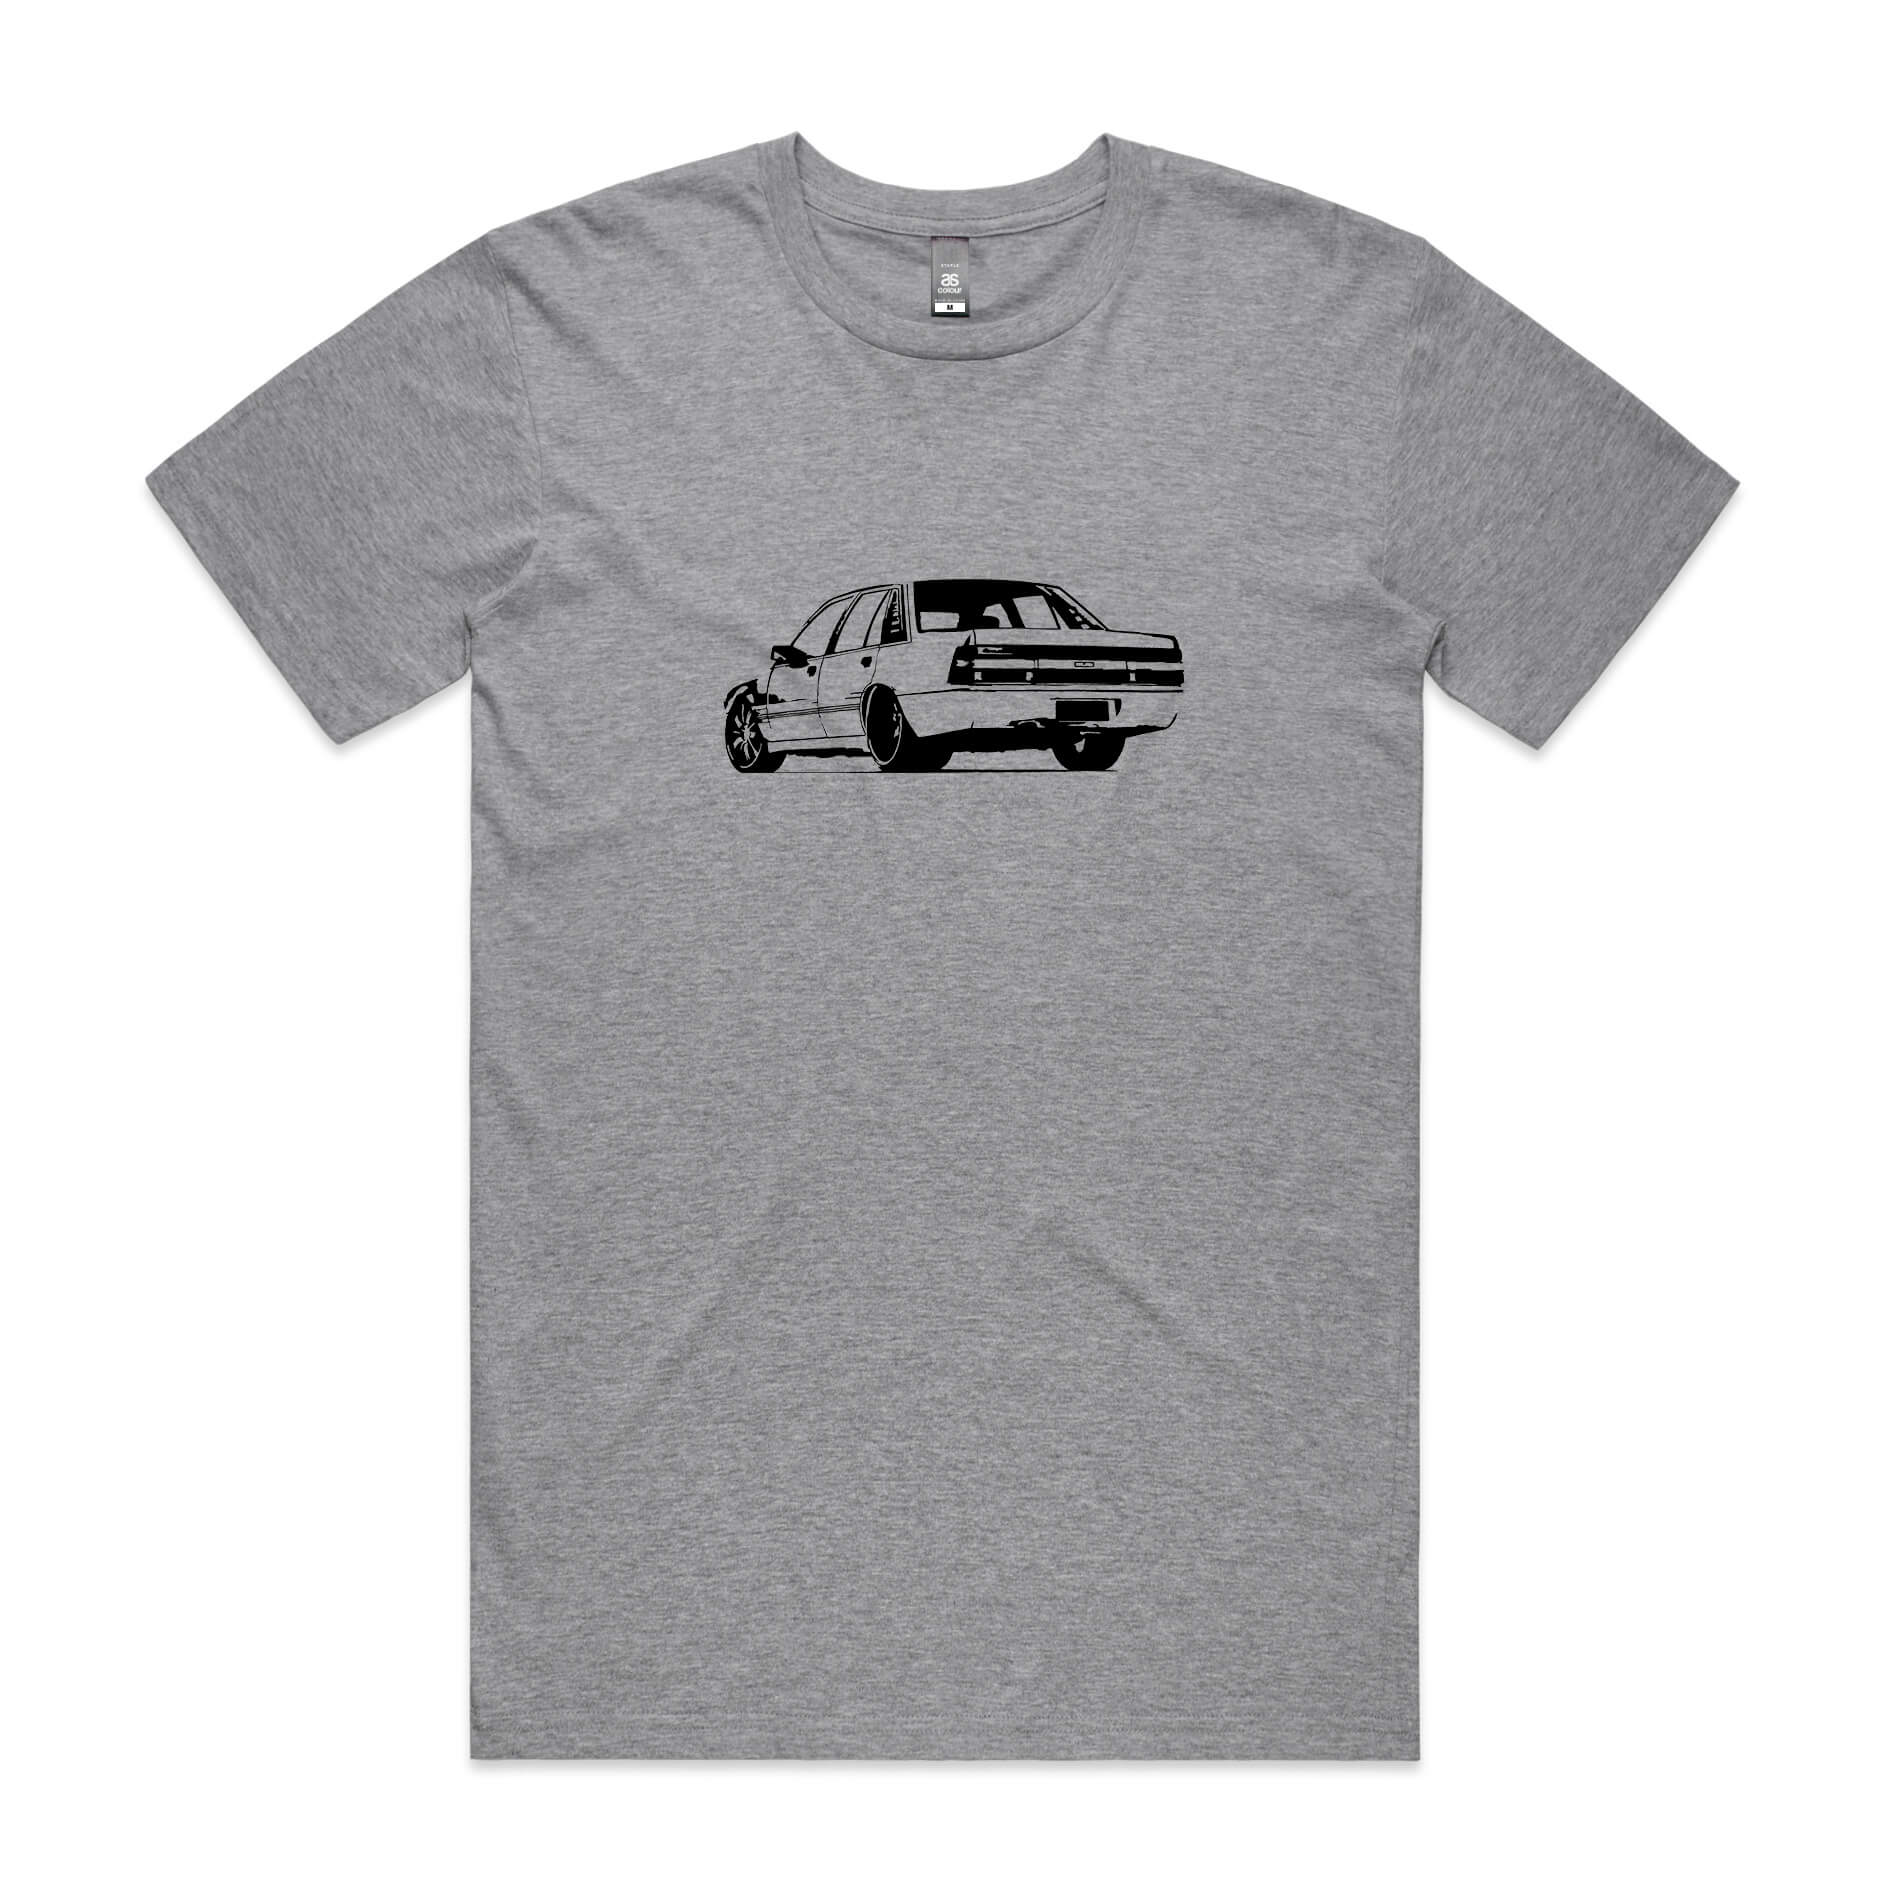 Holden VL Calais t-shirt in grey with black Commodore car graphic